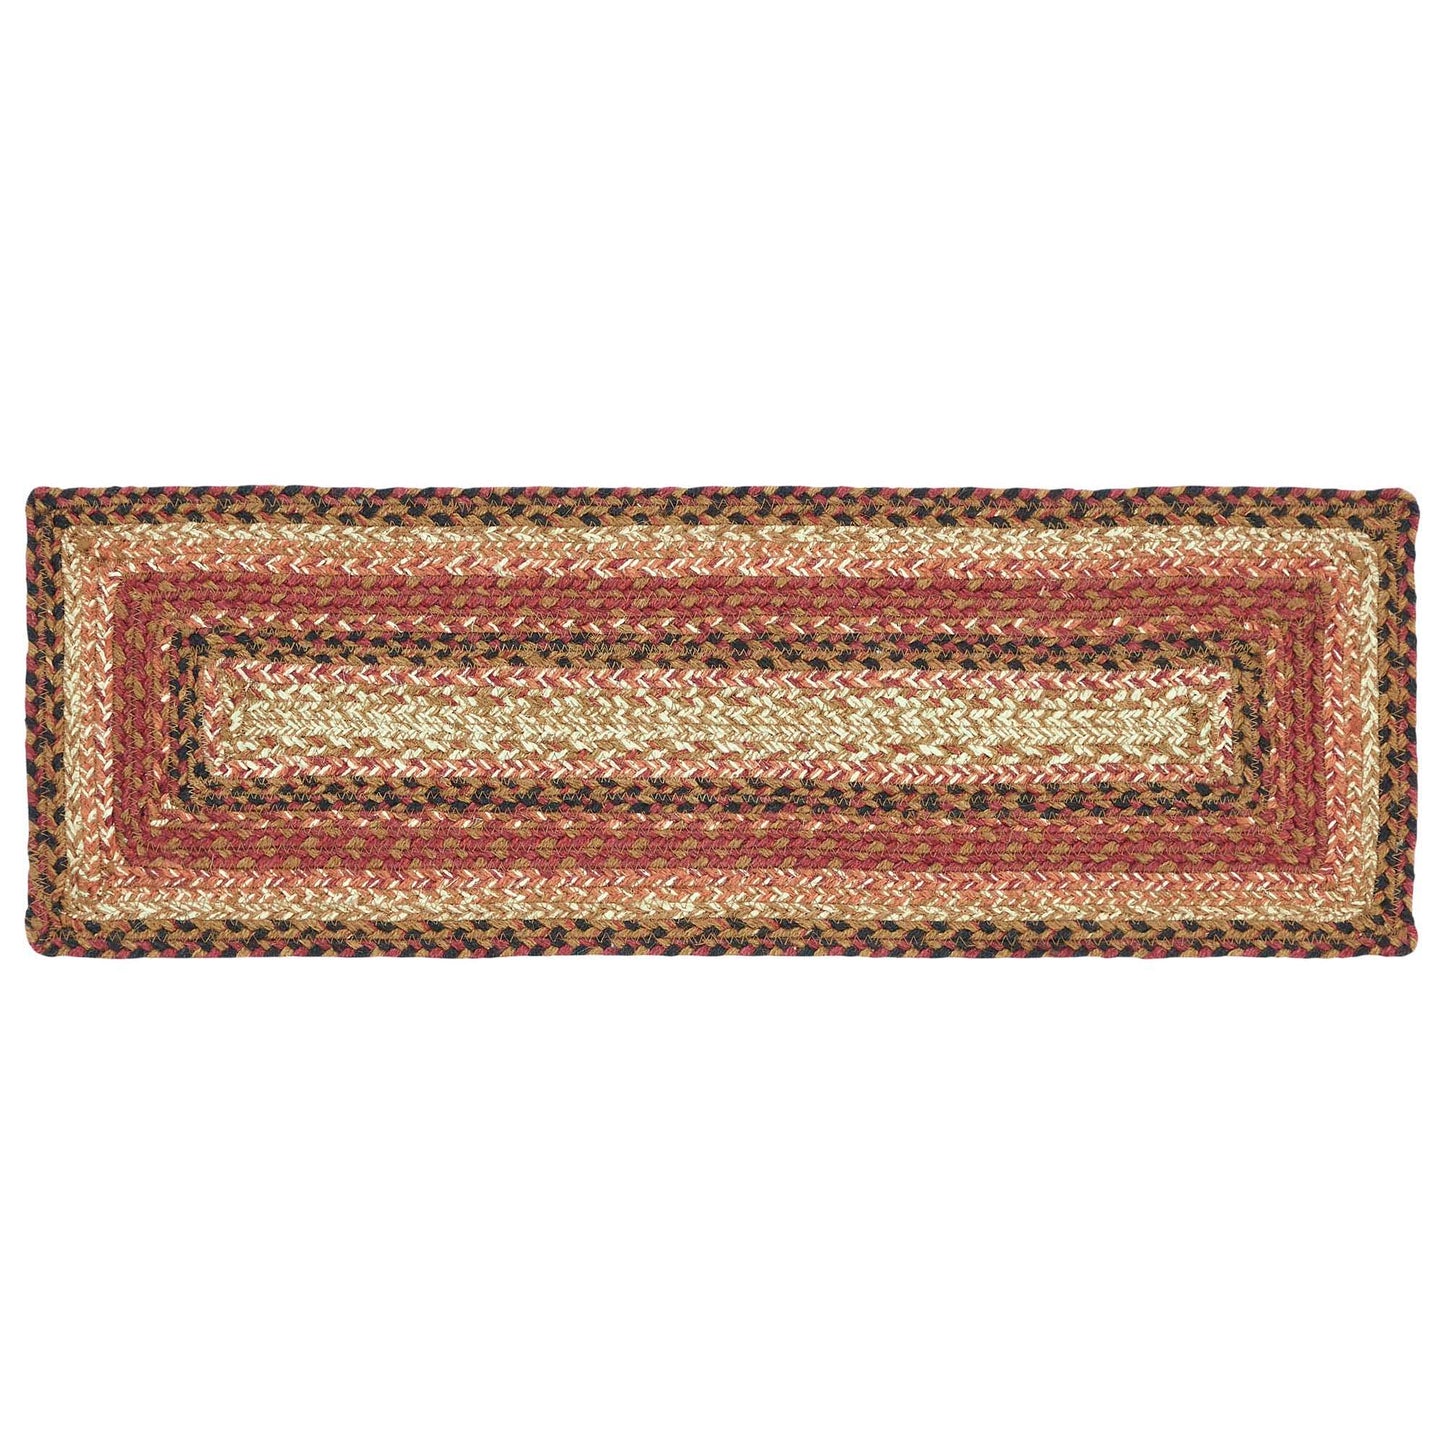 67108-Ginger-Spice-Jute-Stair-Tread-Rect-Latex-8.5x27-image-5